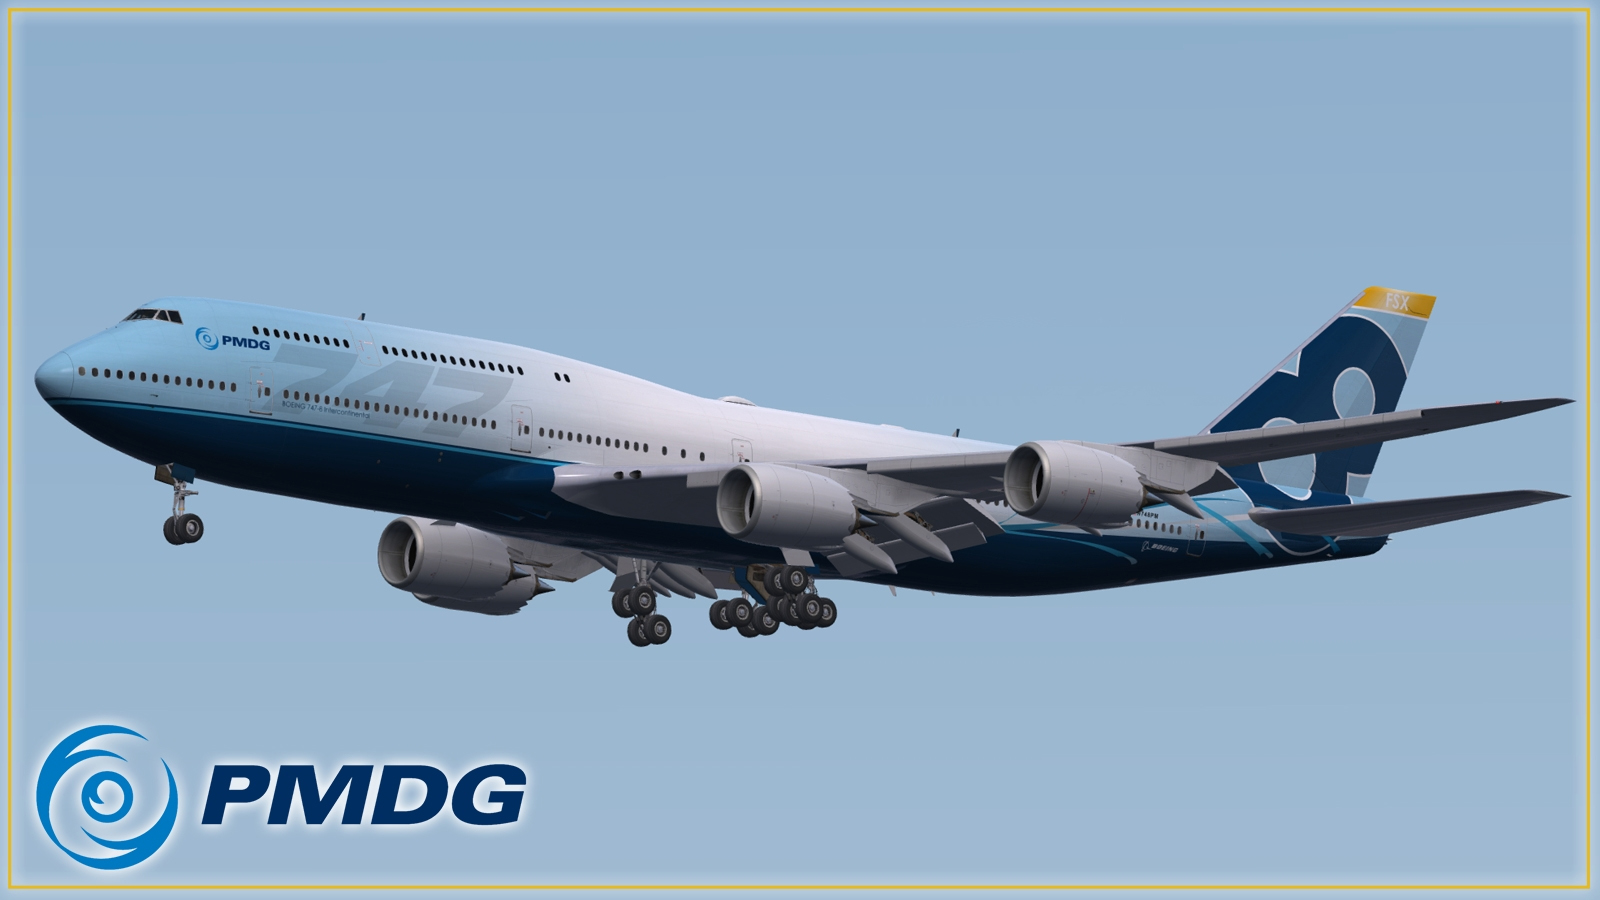 [P3D] PMDG 747 V3 (Not Cracked) without human verification